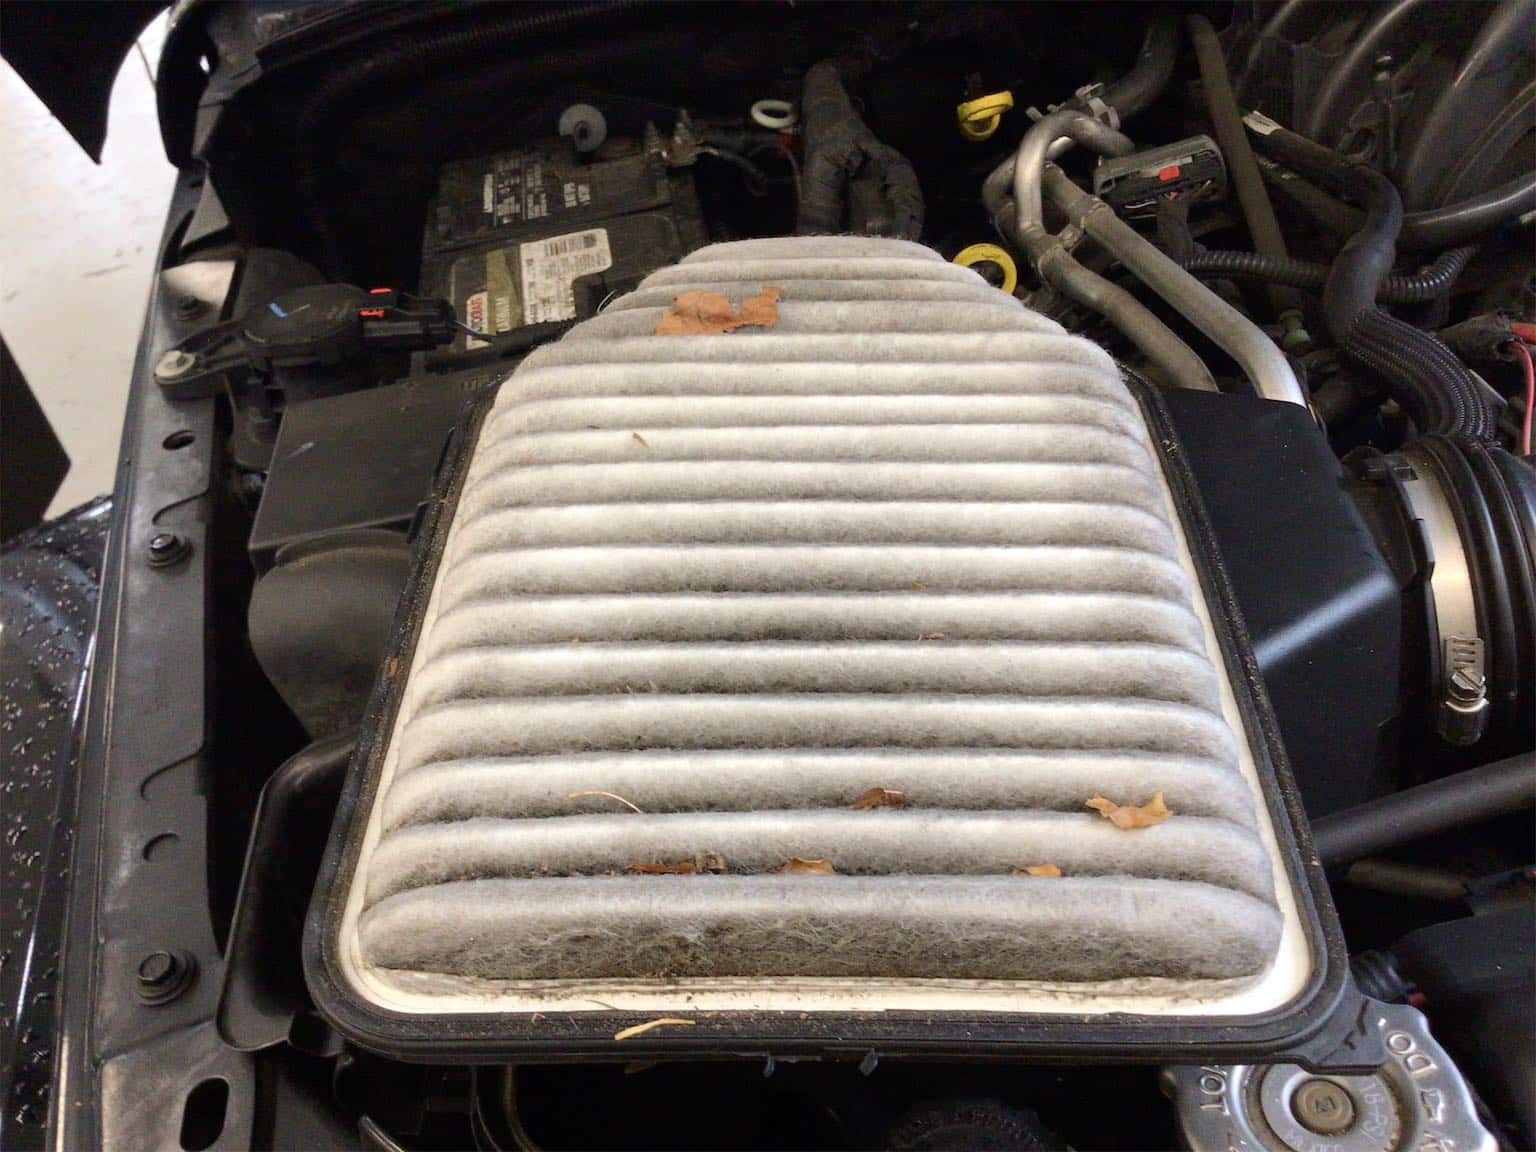 Do I really need to replace my cabin air filter